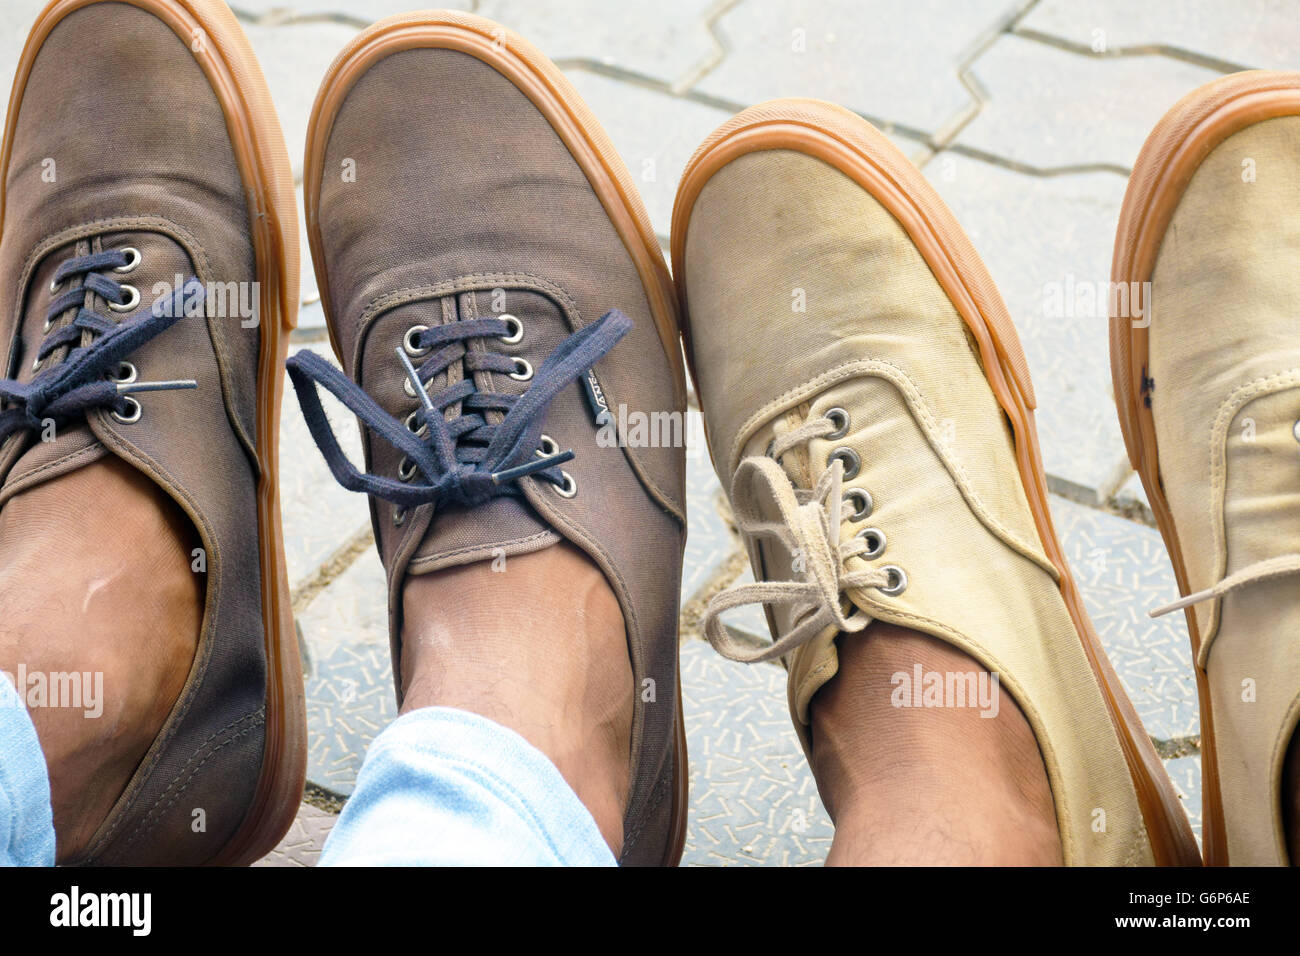 vans shoes. two pair of vans shoes Stock Photo - Alamy